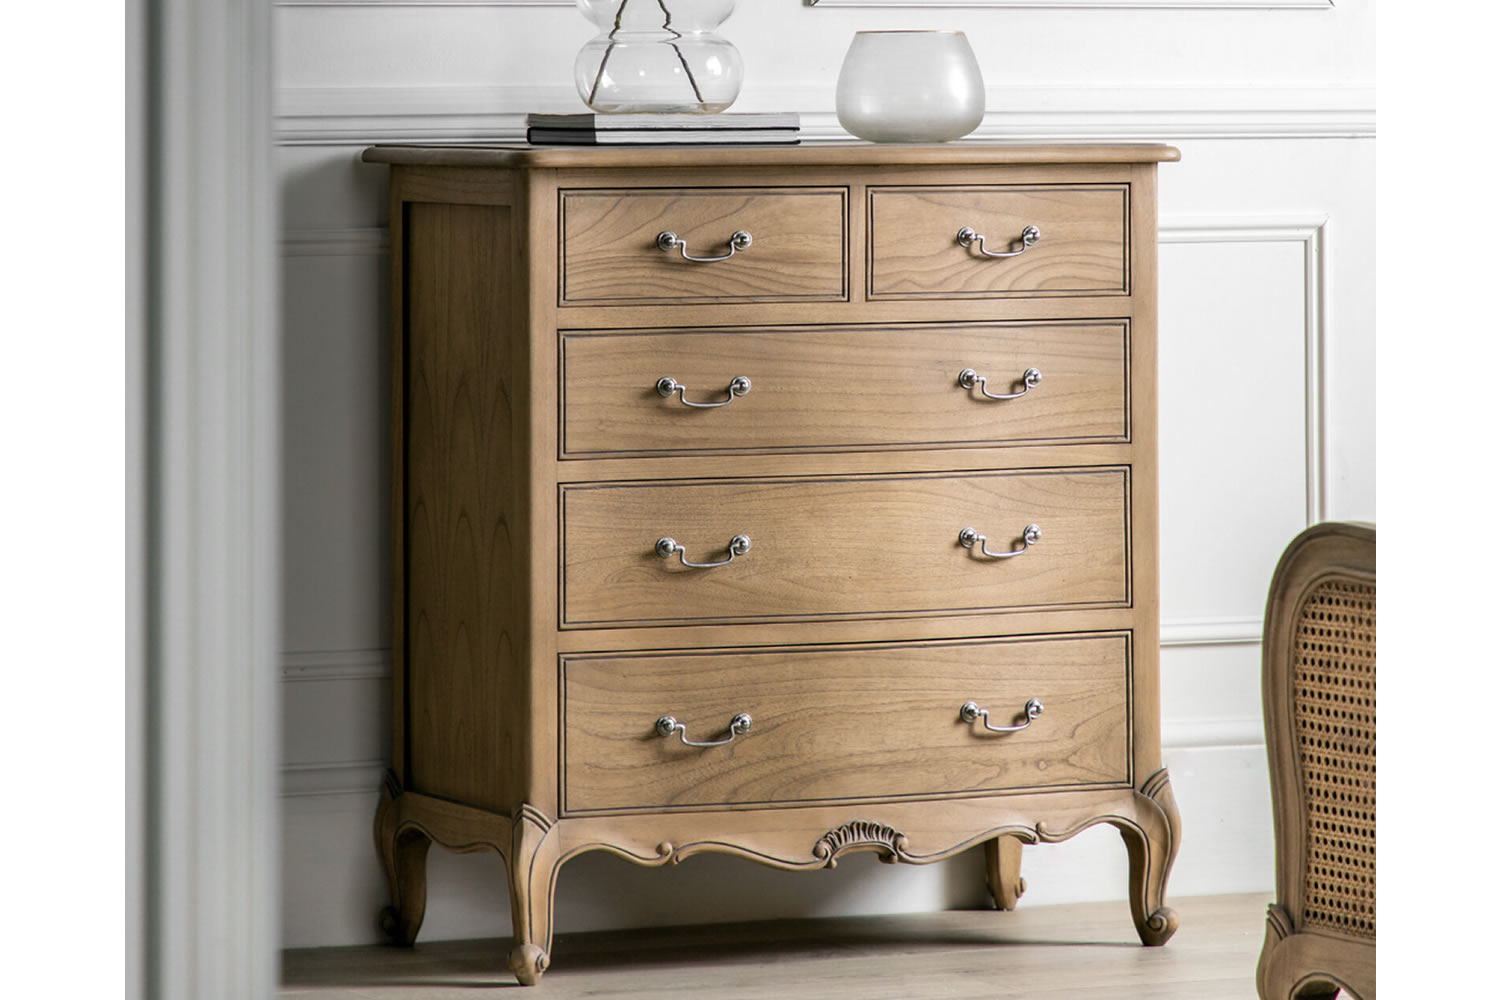 View Chic 5 Drawer Chest Weathered Tall Bedroom Storage Unit With Sliding Drawers Crafted From Solid Mindy Ash Traditional French Furniture Design information